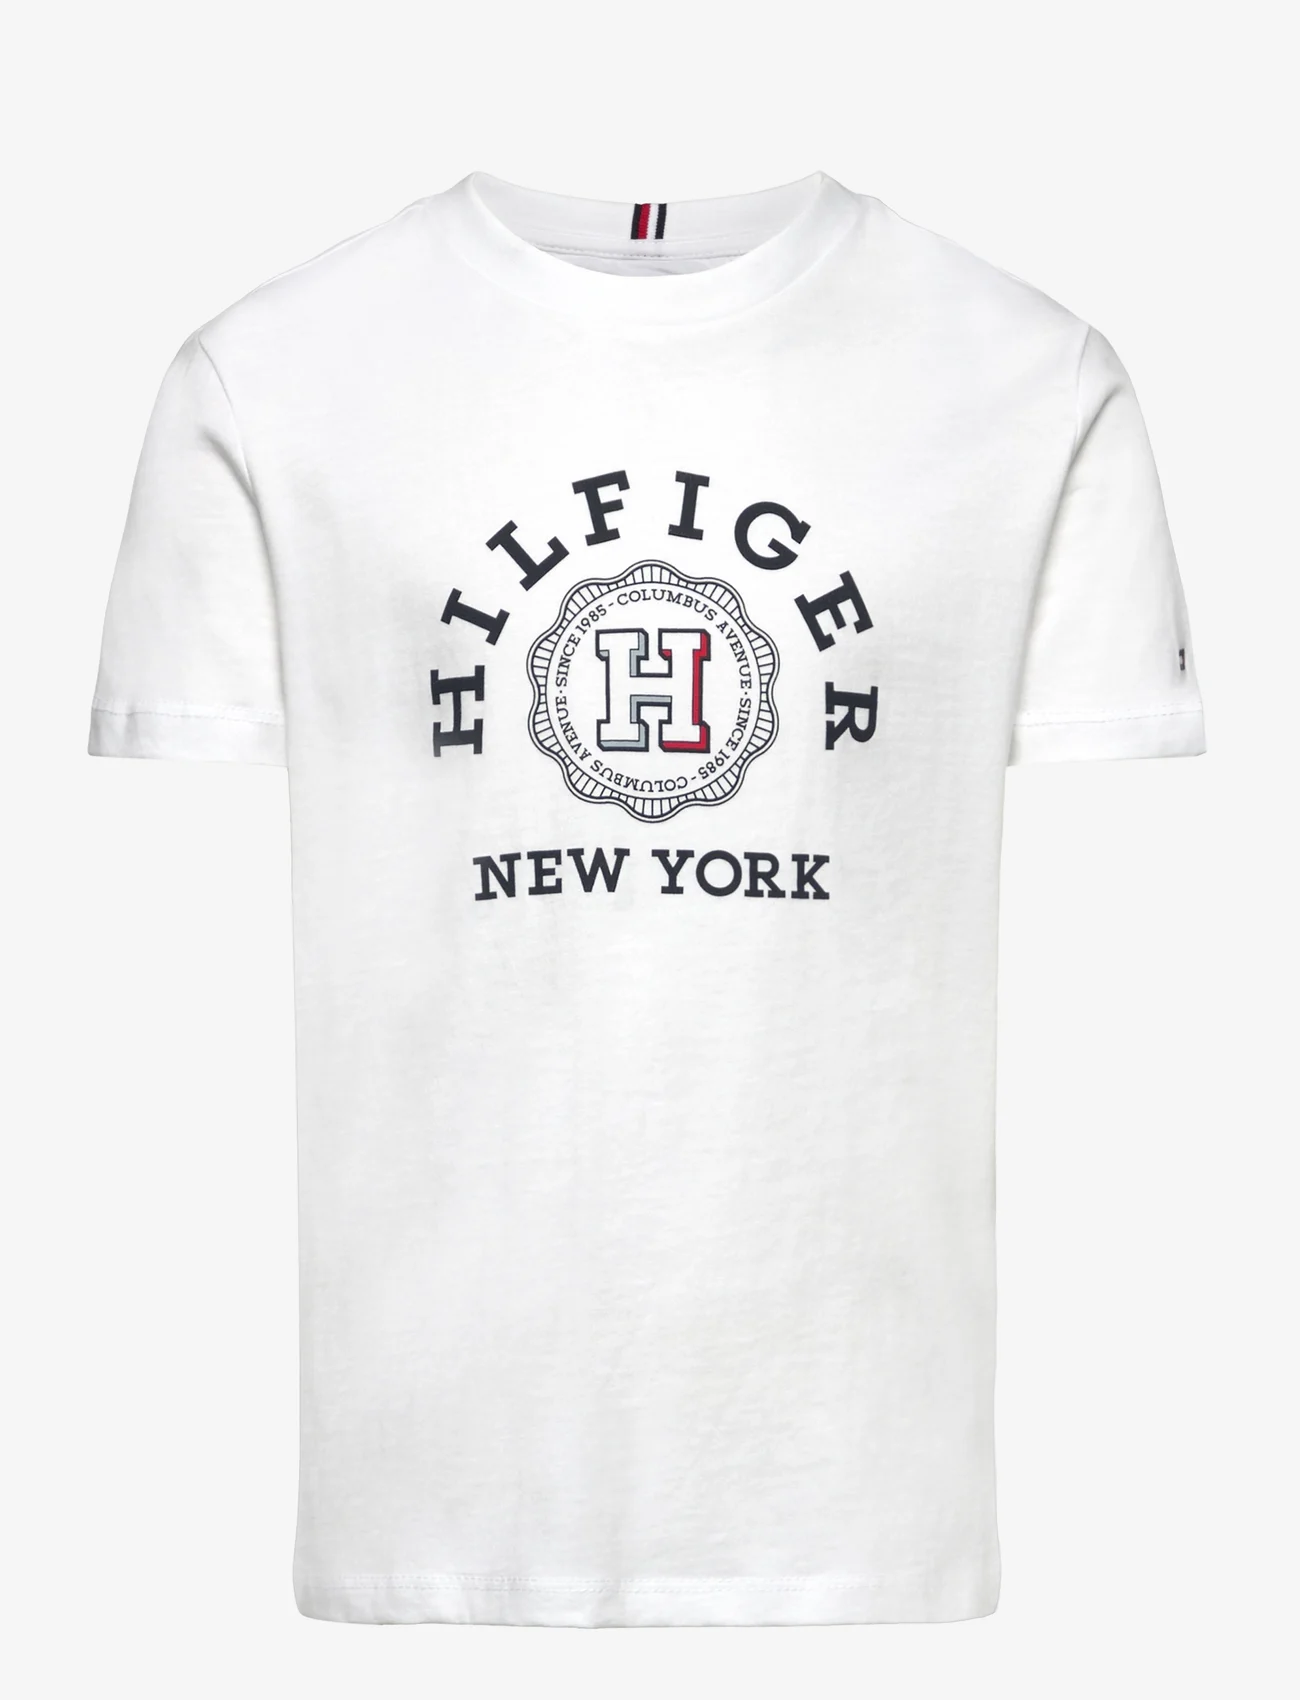 Tommy Hilfiger - MONOTYPE ARCH TEE S/S - short-sleeved t-shirts - white - 0